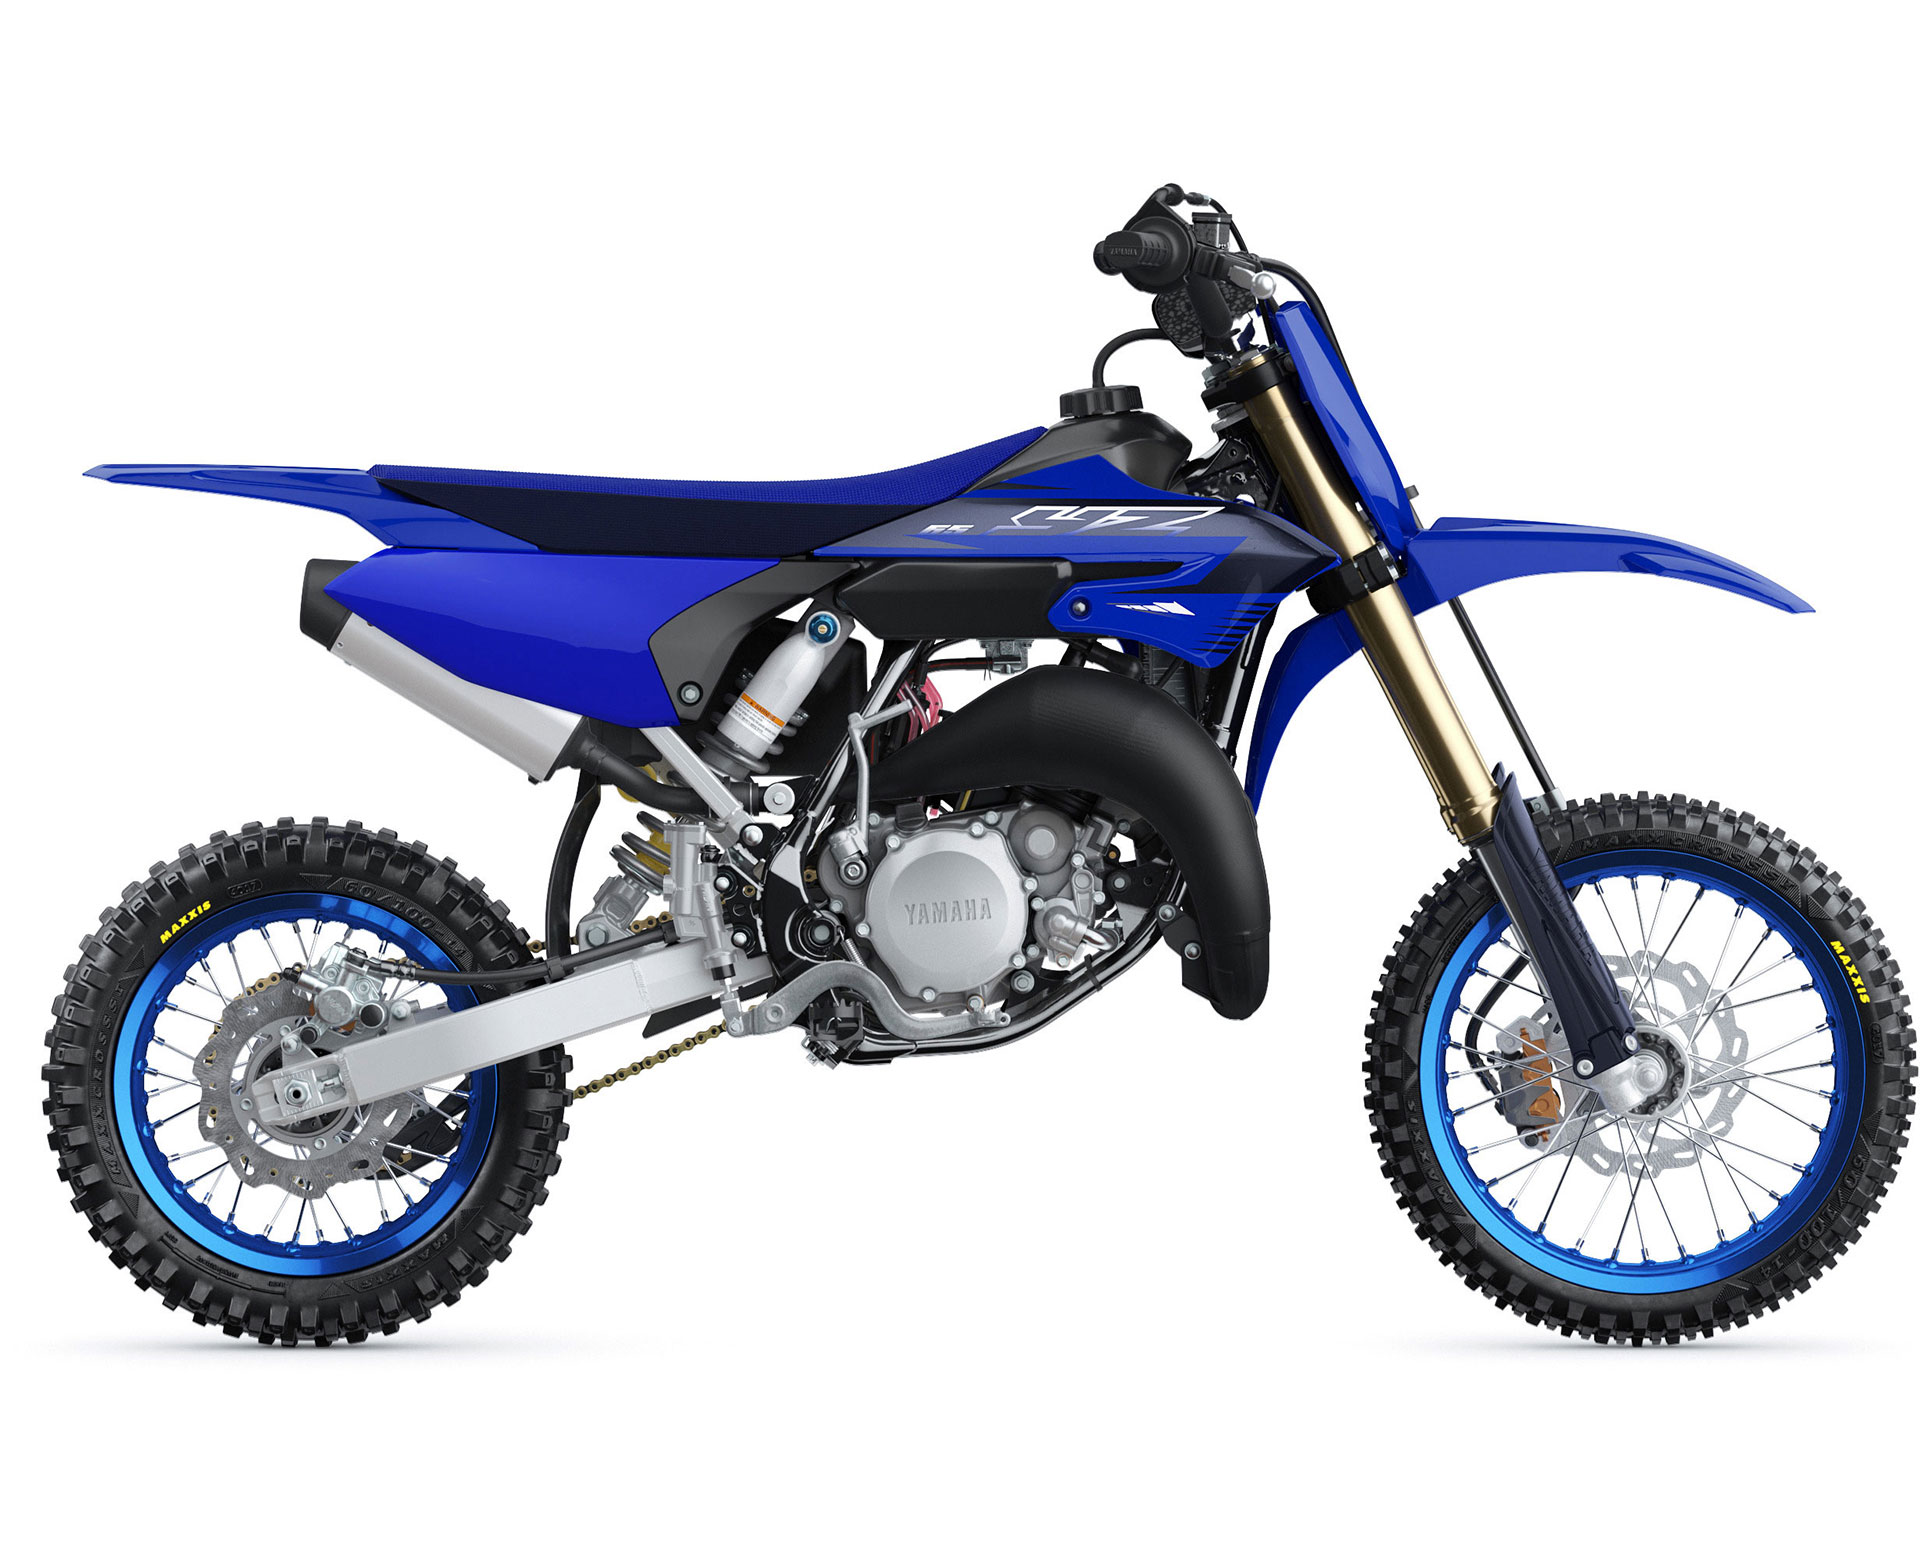 Thumbnail of your customized 2023 YZ65